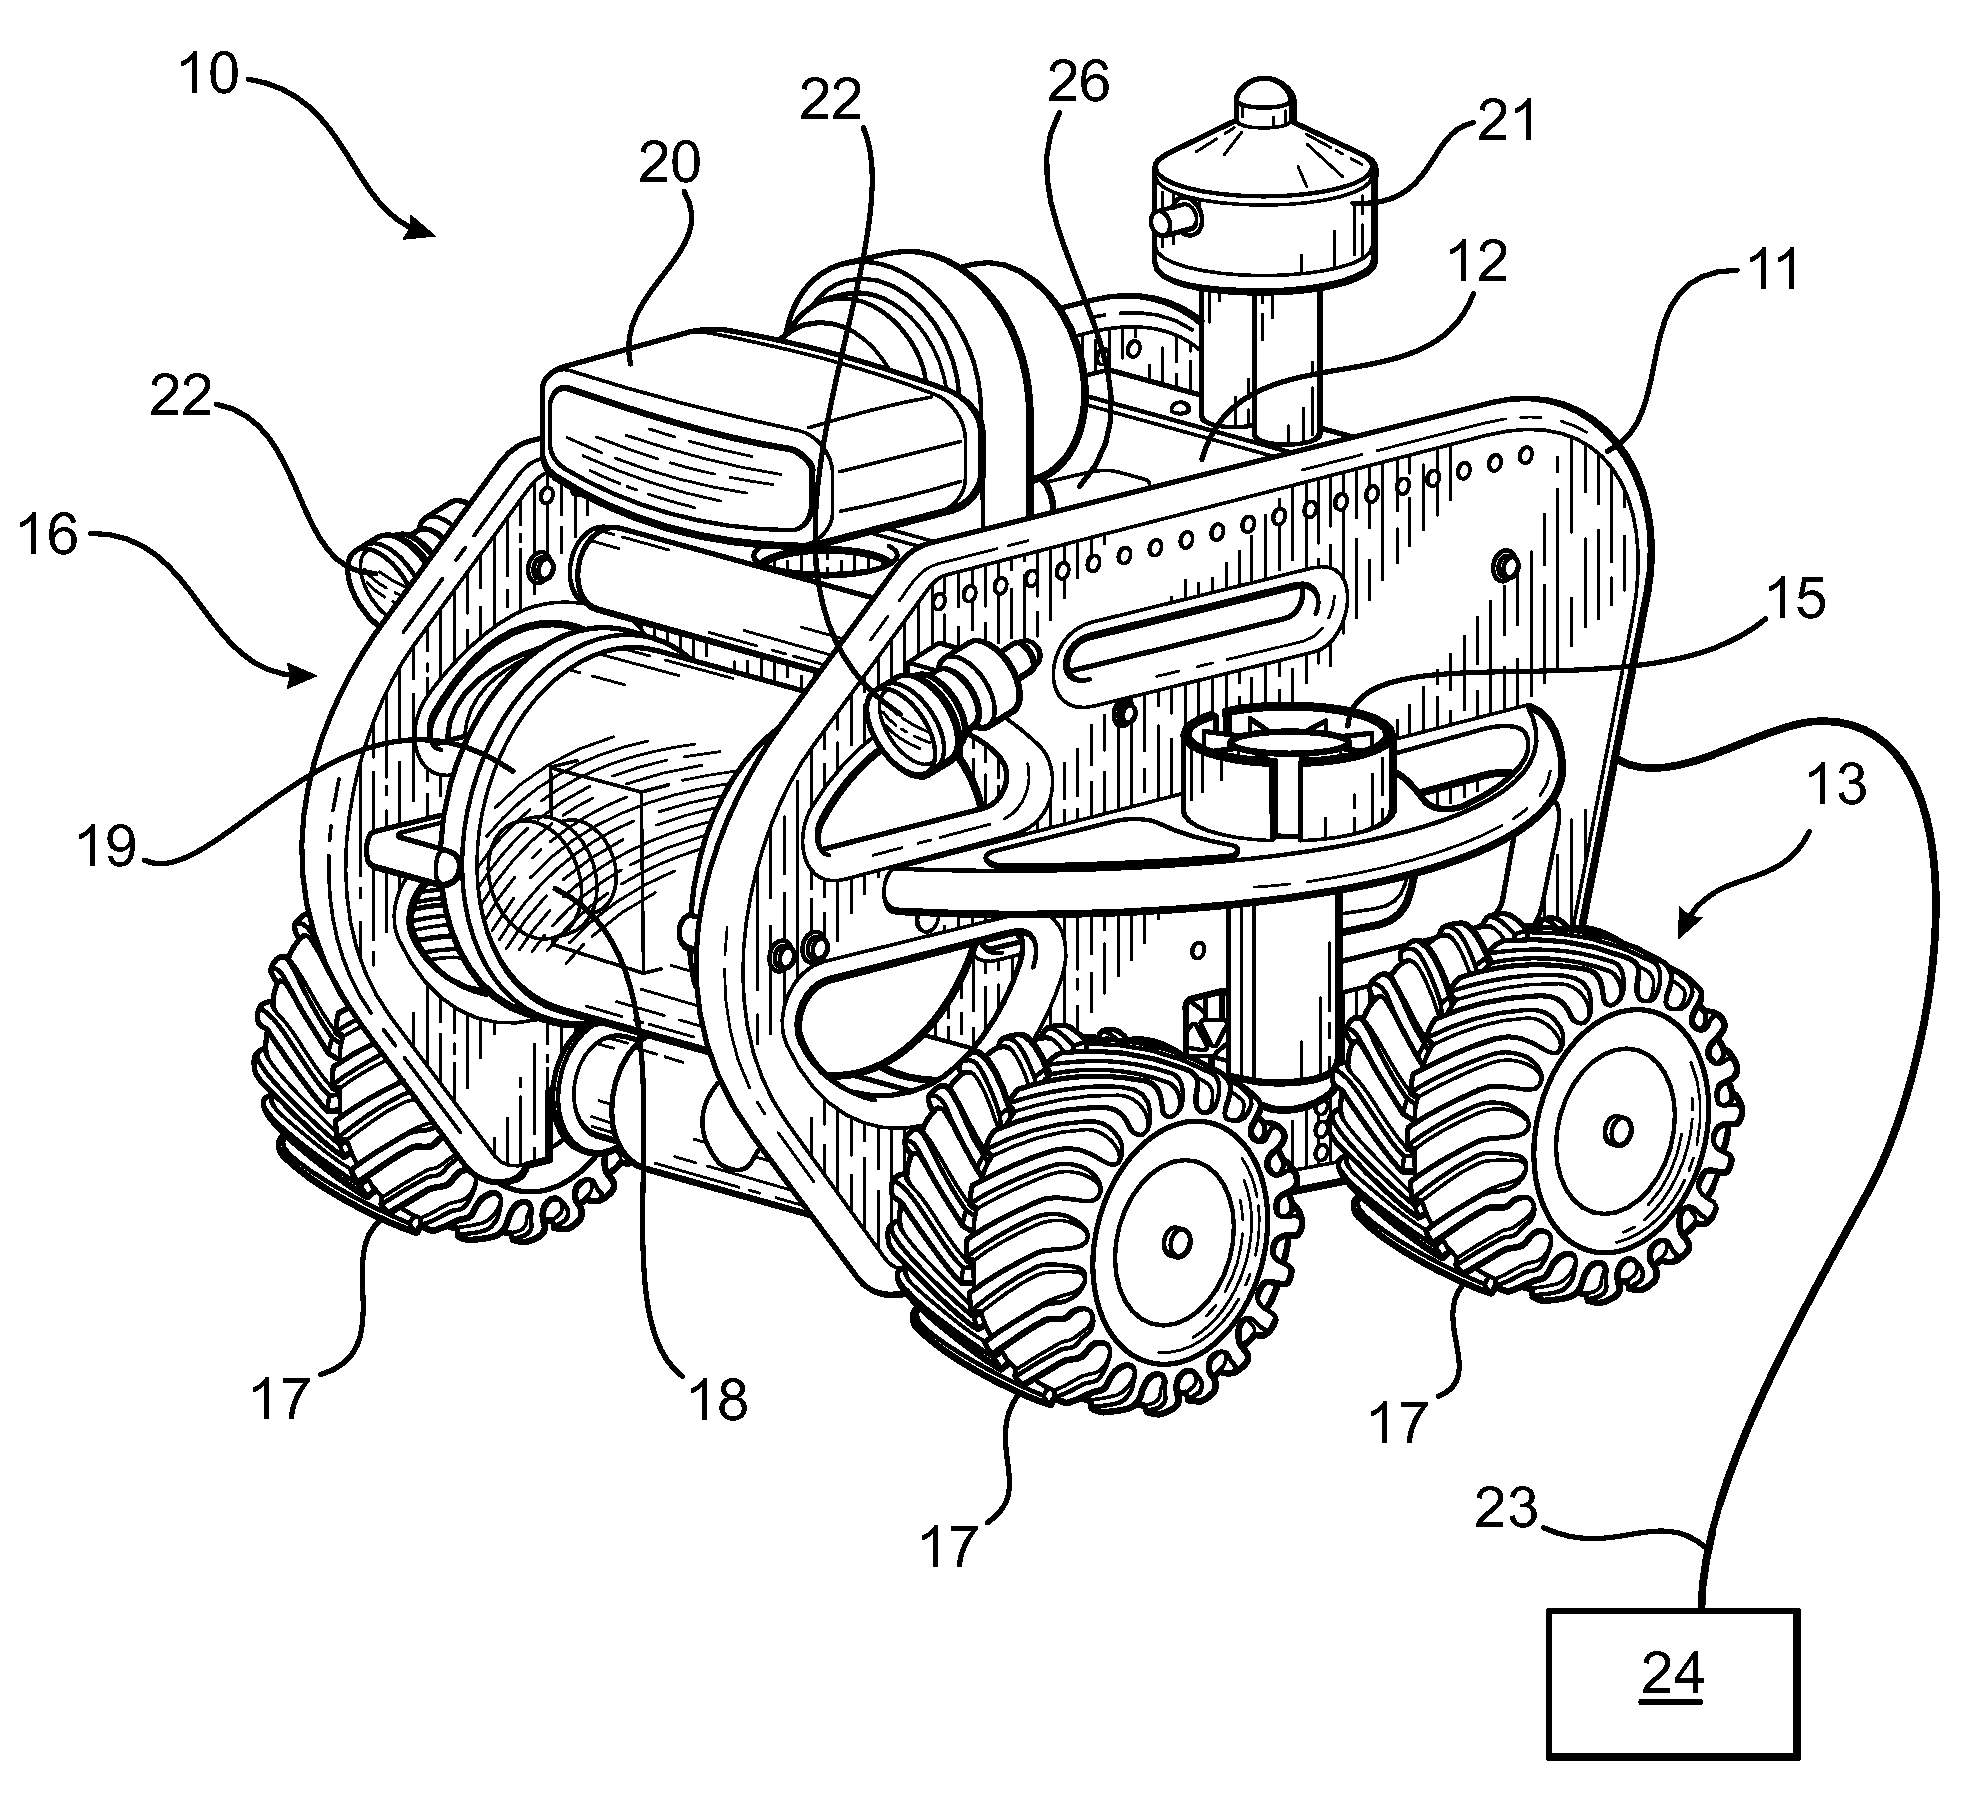 Underwater crawler vehicle having search and identification capabilities and methods of use